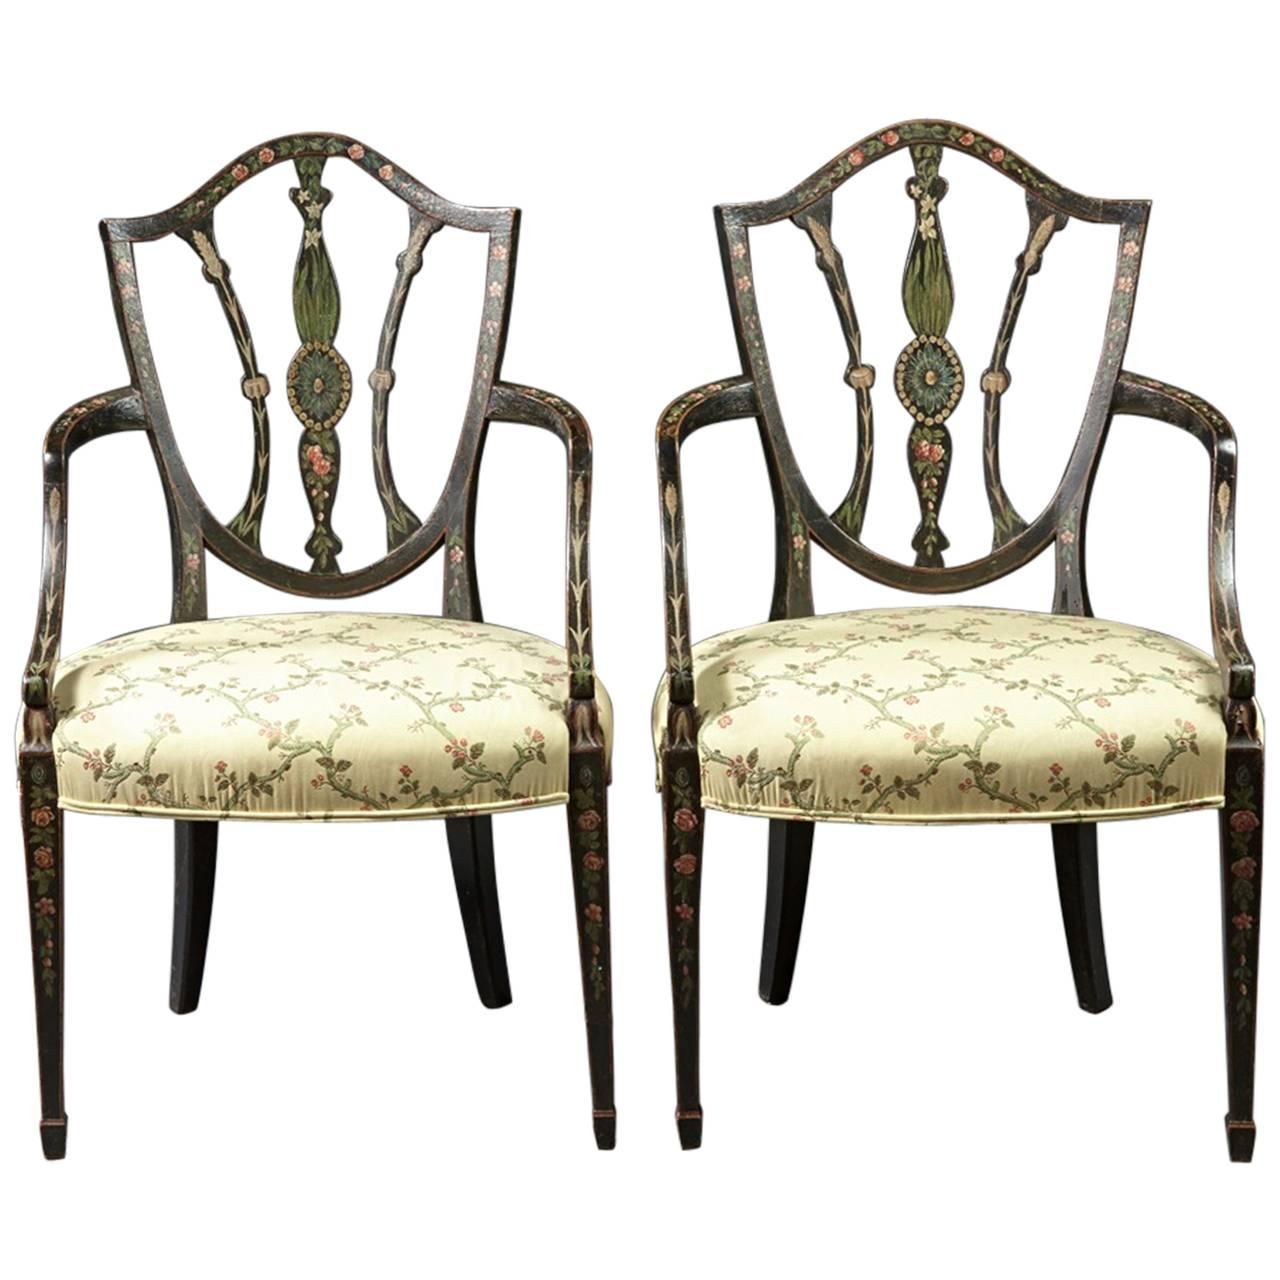 Pair of George III Period Painted Armchairs, 18th Century, English For Sale